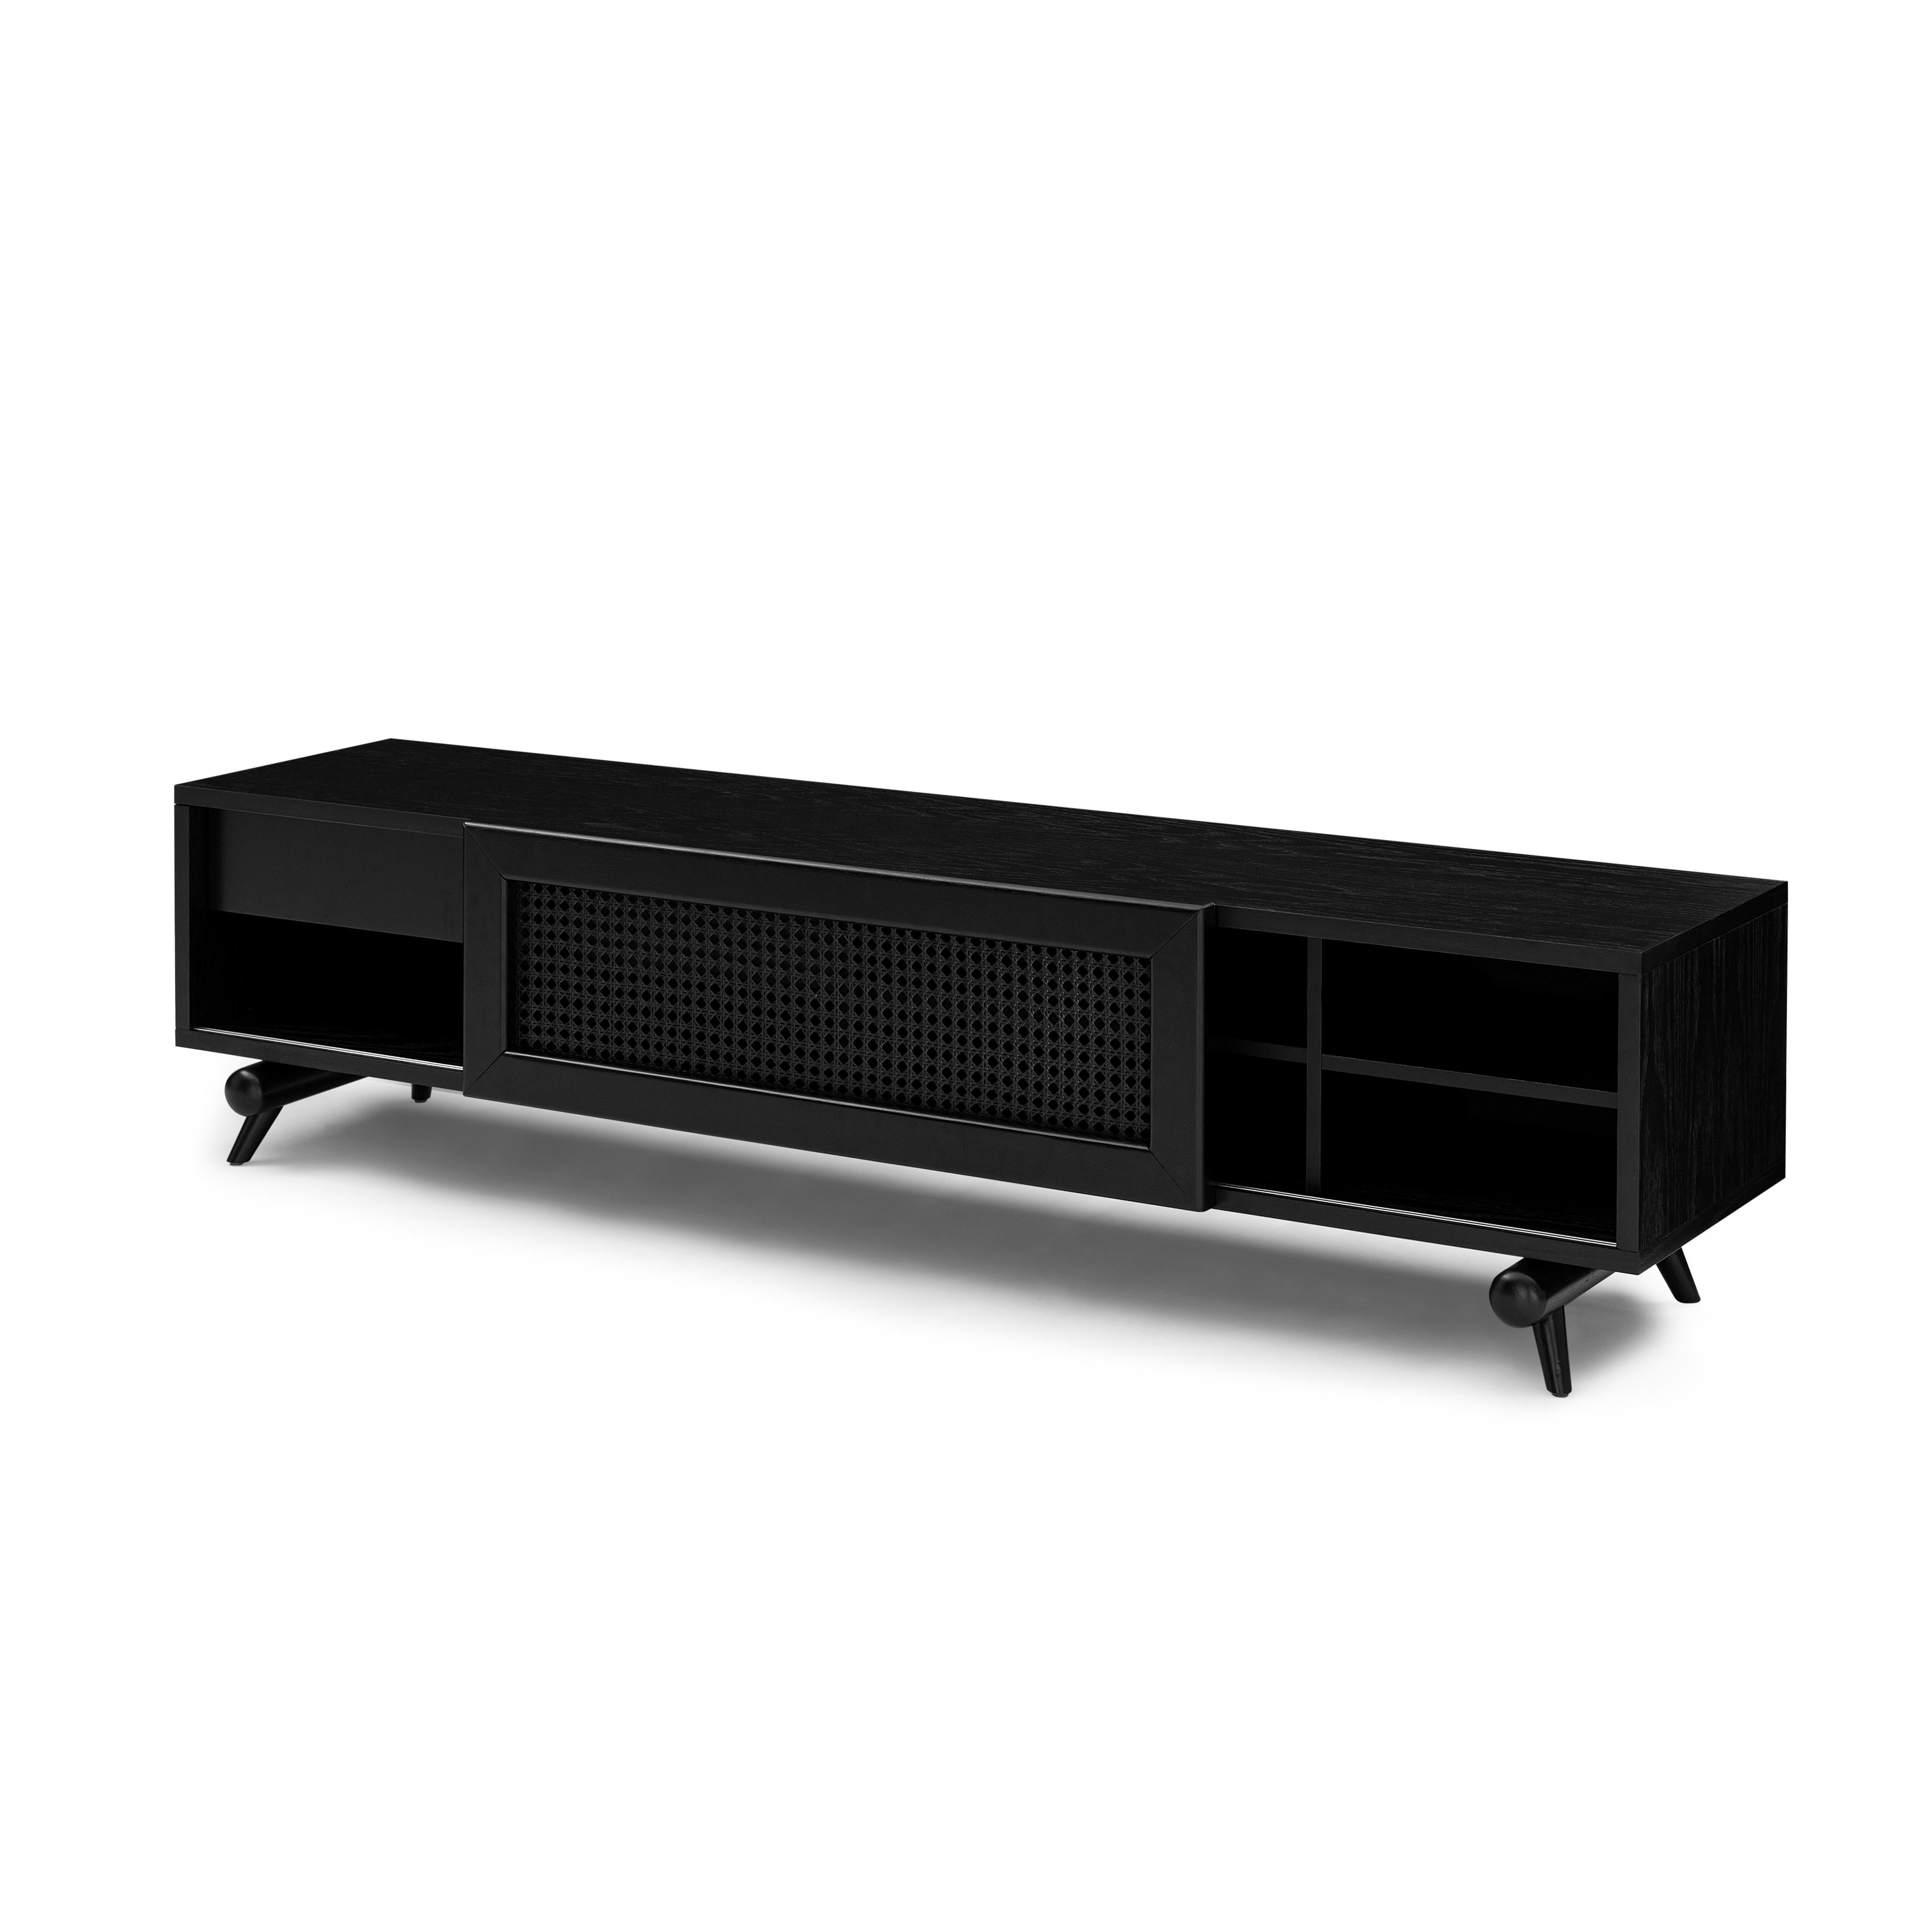 The Plot storage console is yet another Uultis case piece that combines style, functionality, and spacial possibilities with its black wood finish and cane-webbing sliding door giving an eclectic look that is so popular in today's design world. This